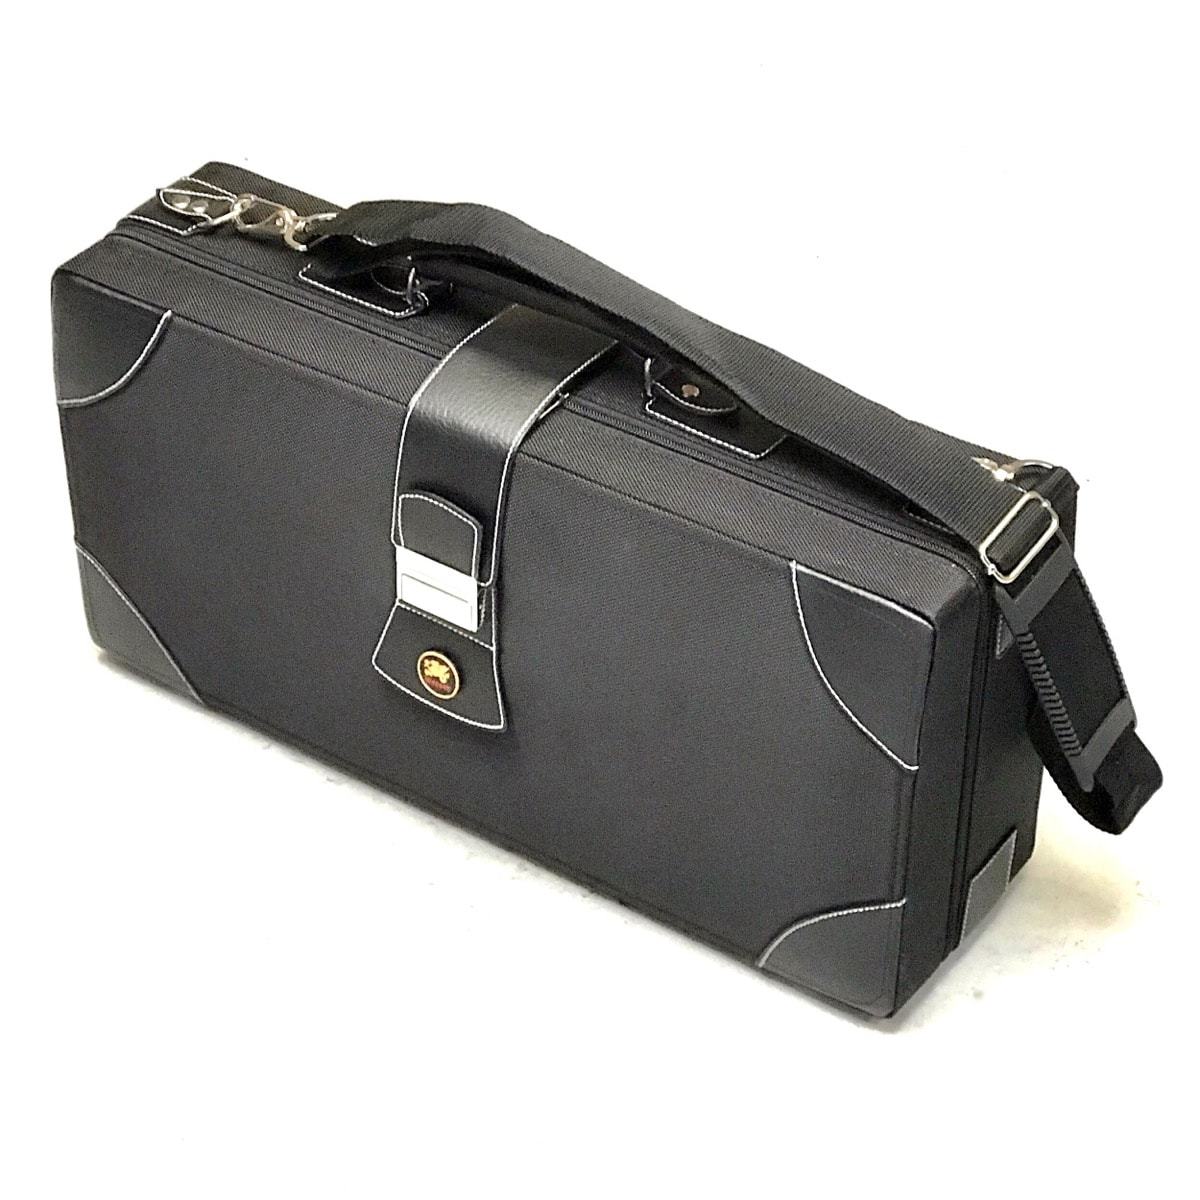 An image of a lightweight foambody case for a Bb Professional Trumpet from Wessex Tubas